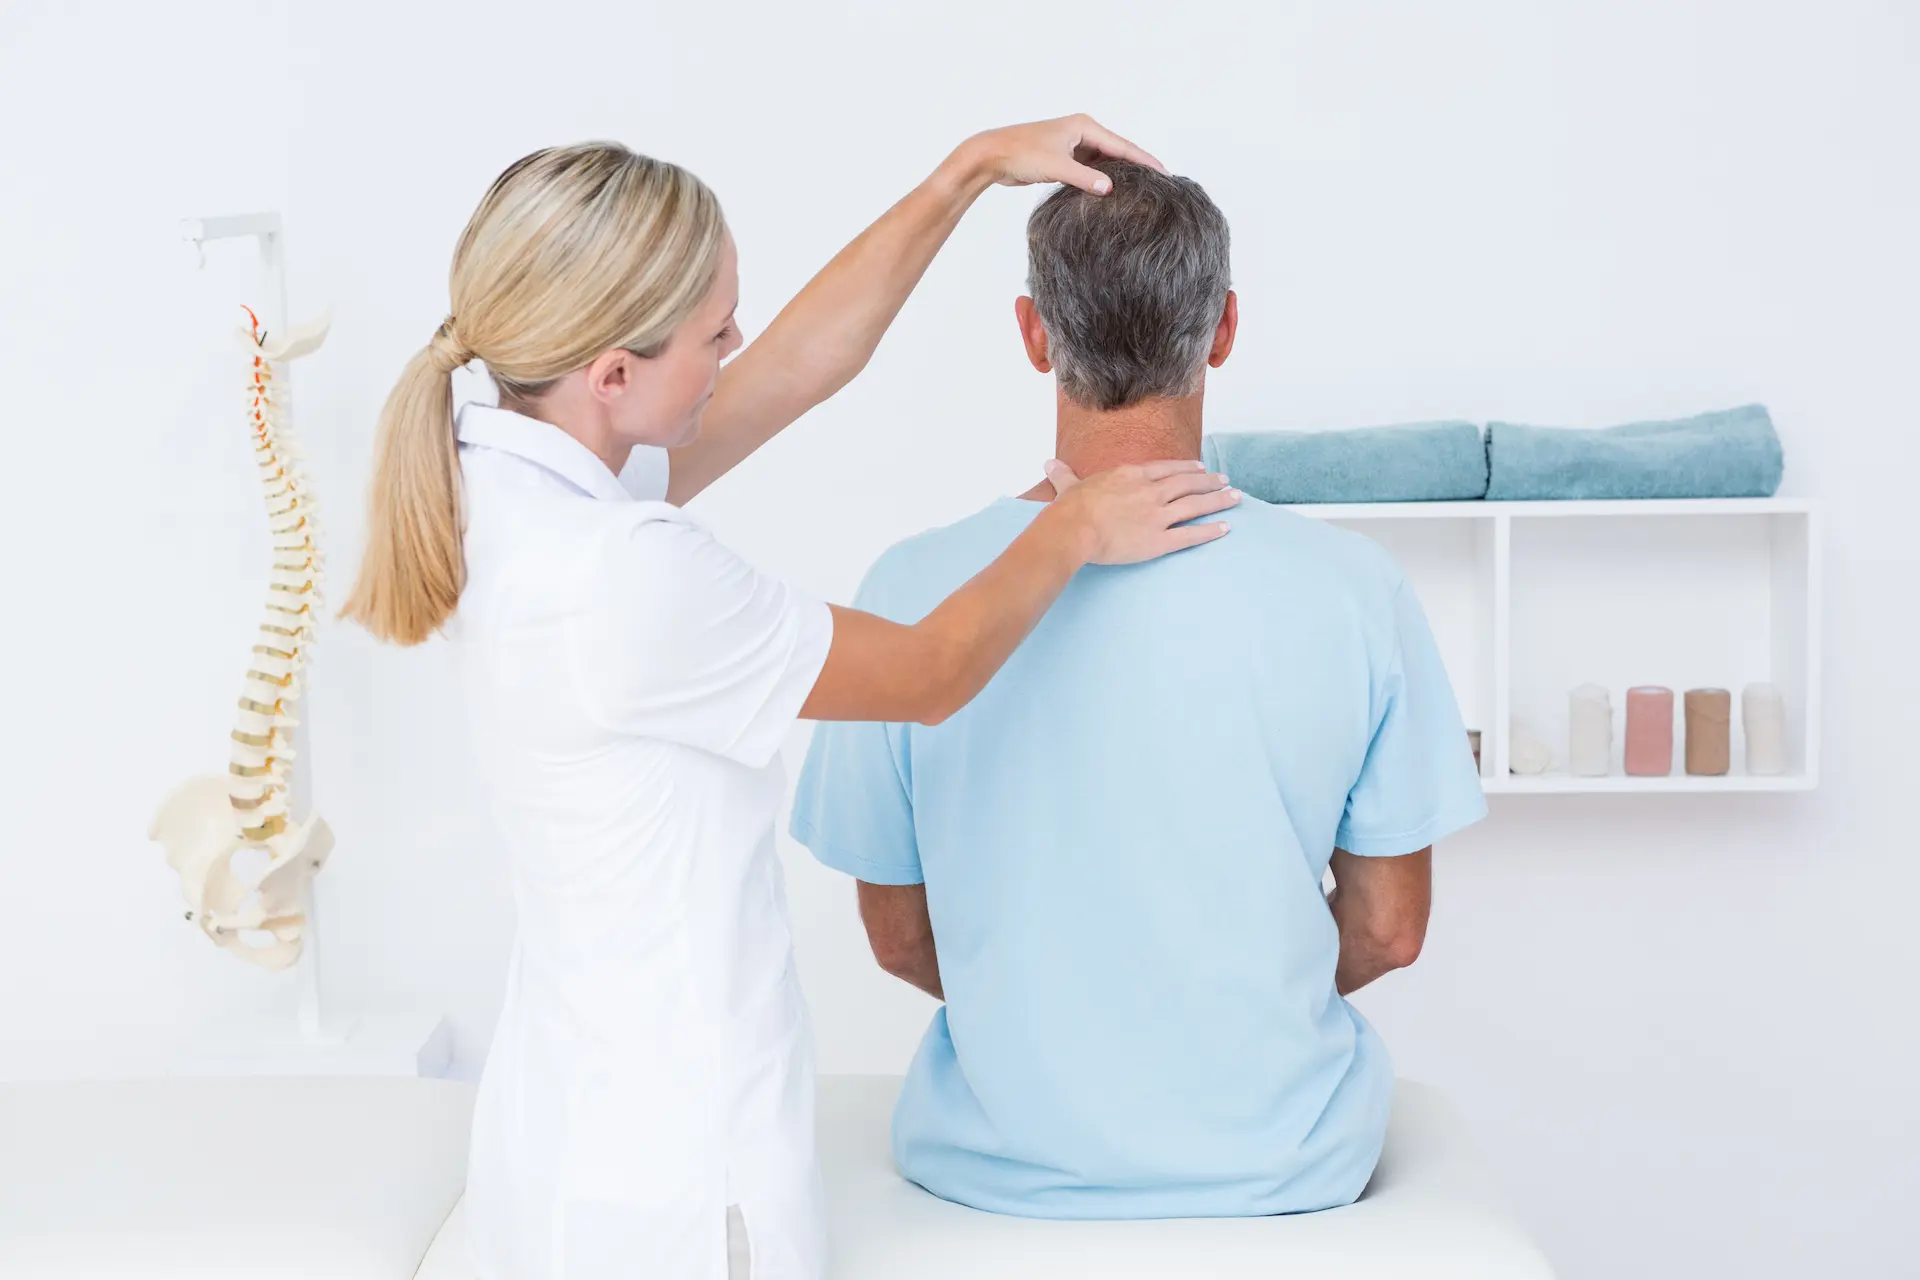 Medical provider examining male patient's neck